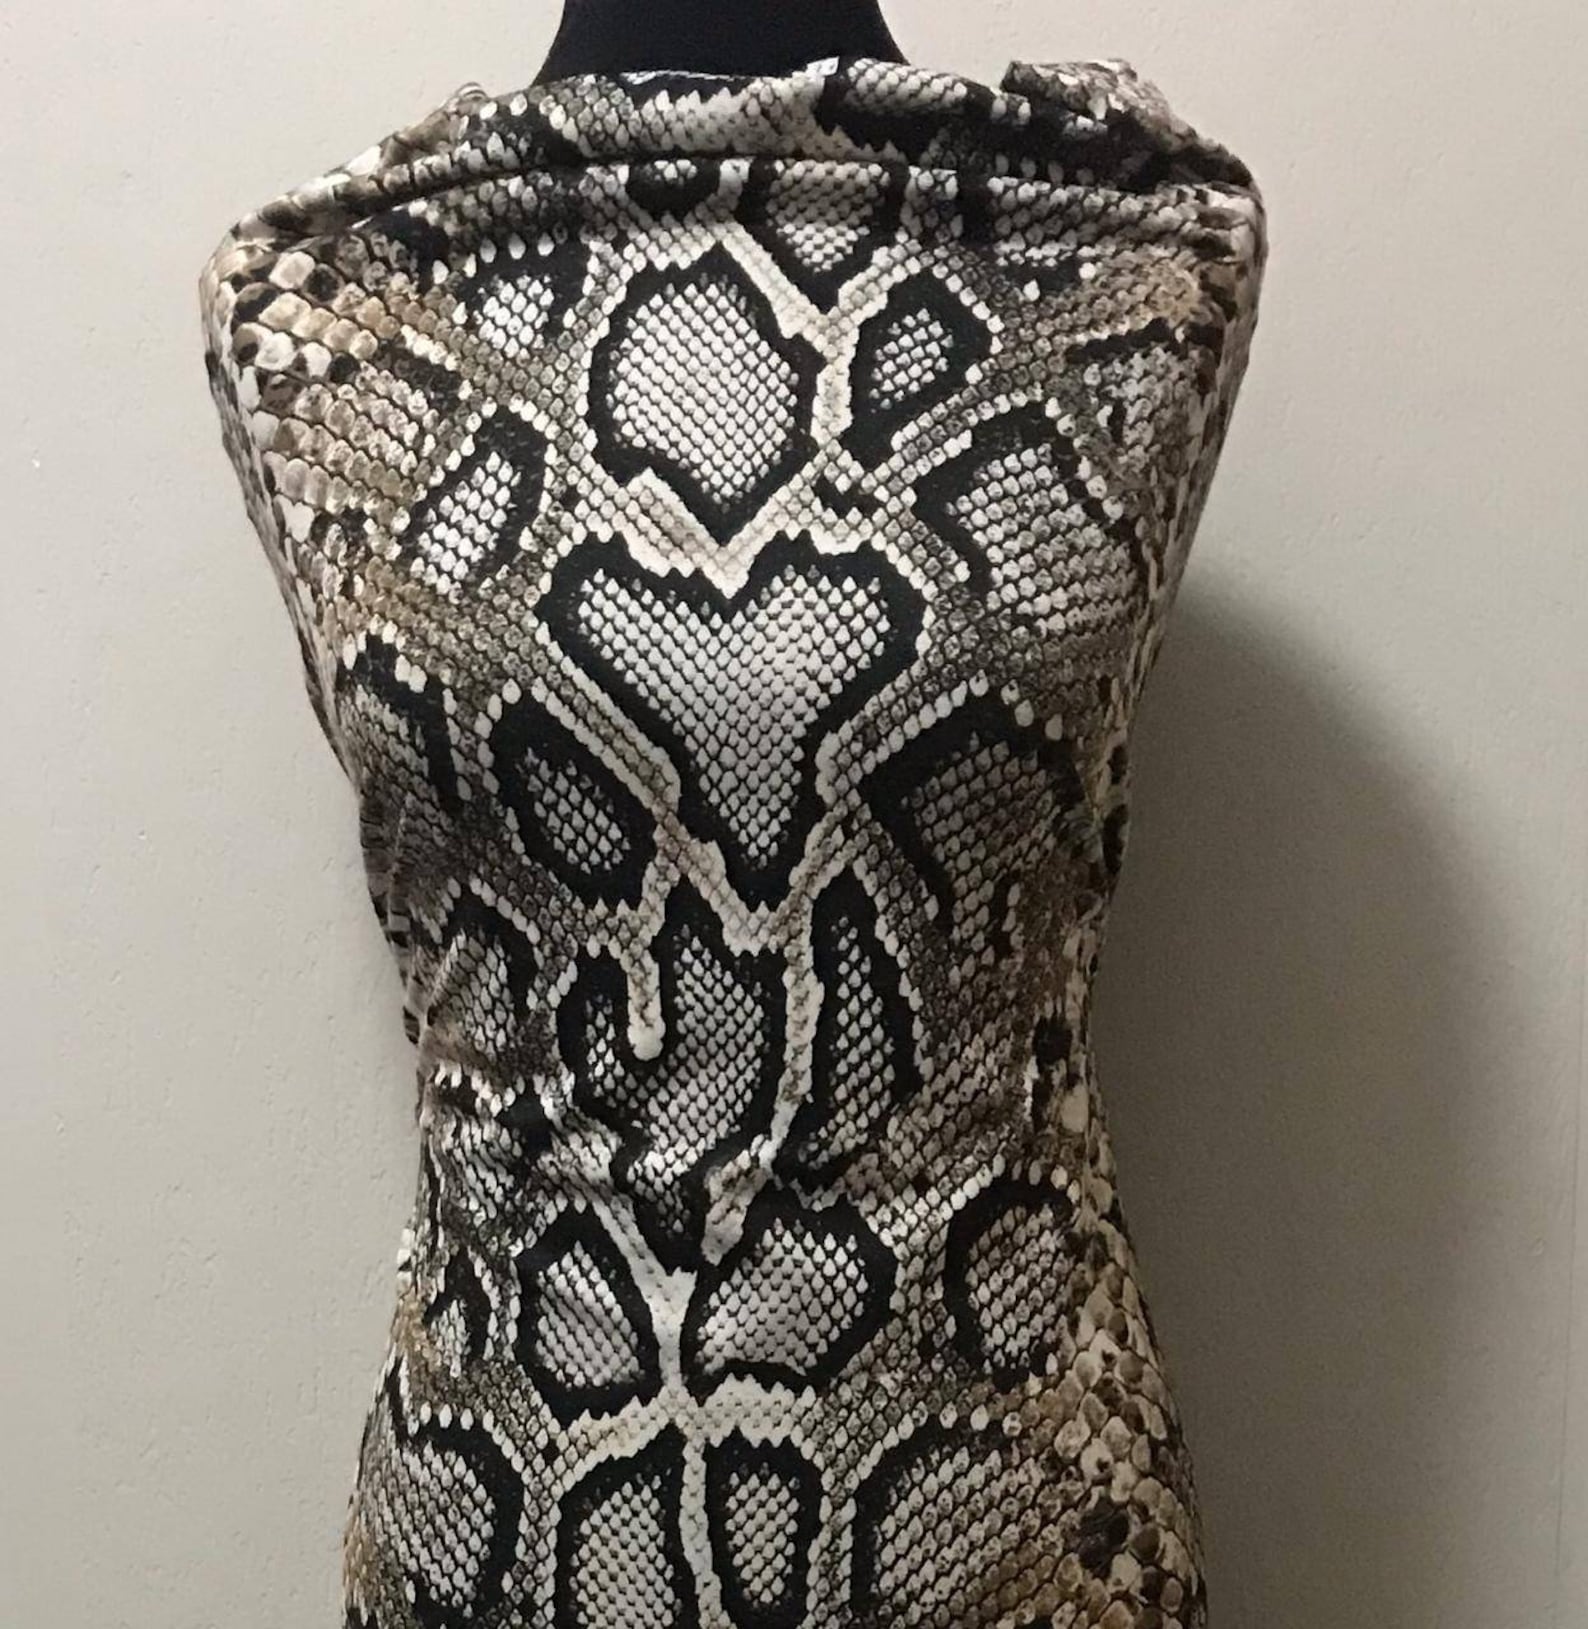 Python jersey fabric/haute couture fabric/brown snakeskin | Etsy